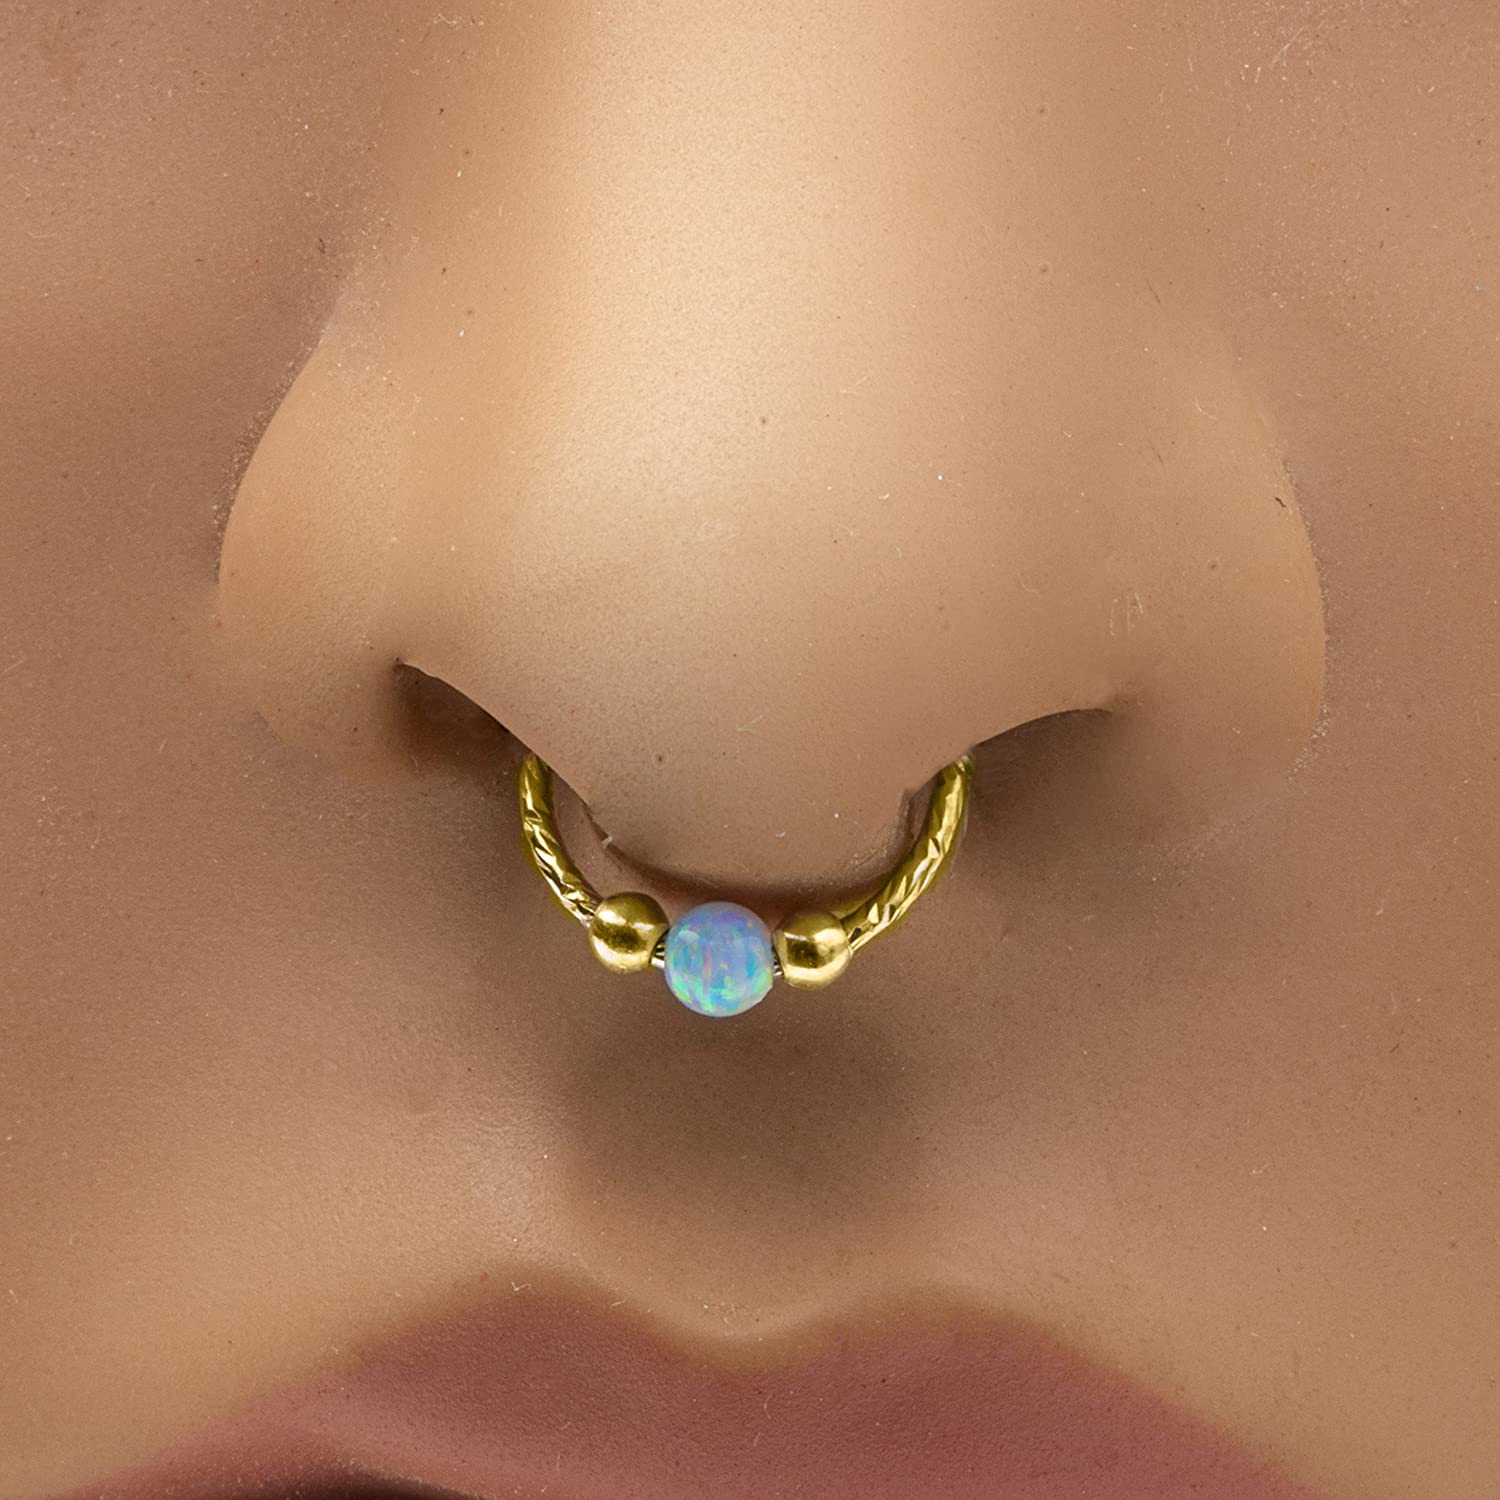 Amazon.com: Fake Septum Ring 14k gold filled Faux Nose Piercing - Faux  Triangle Nose Piercing Cuff : Handmade Products